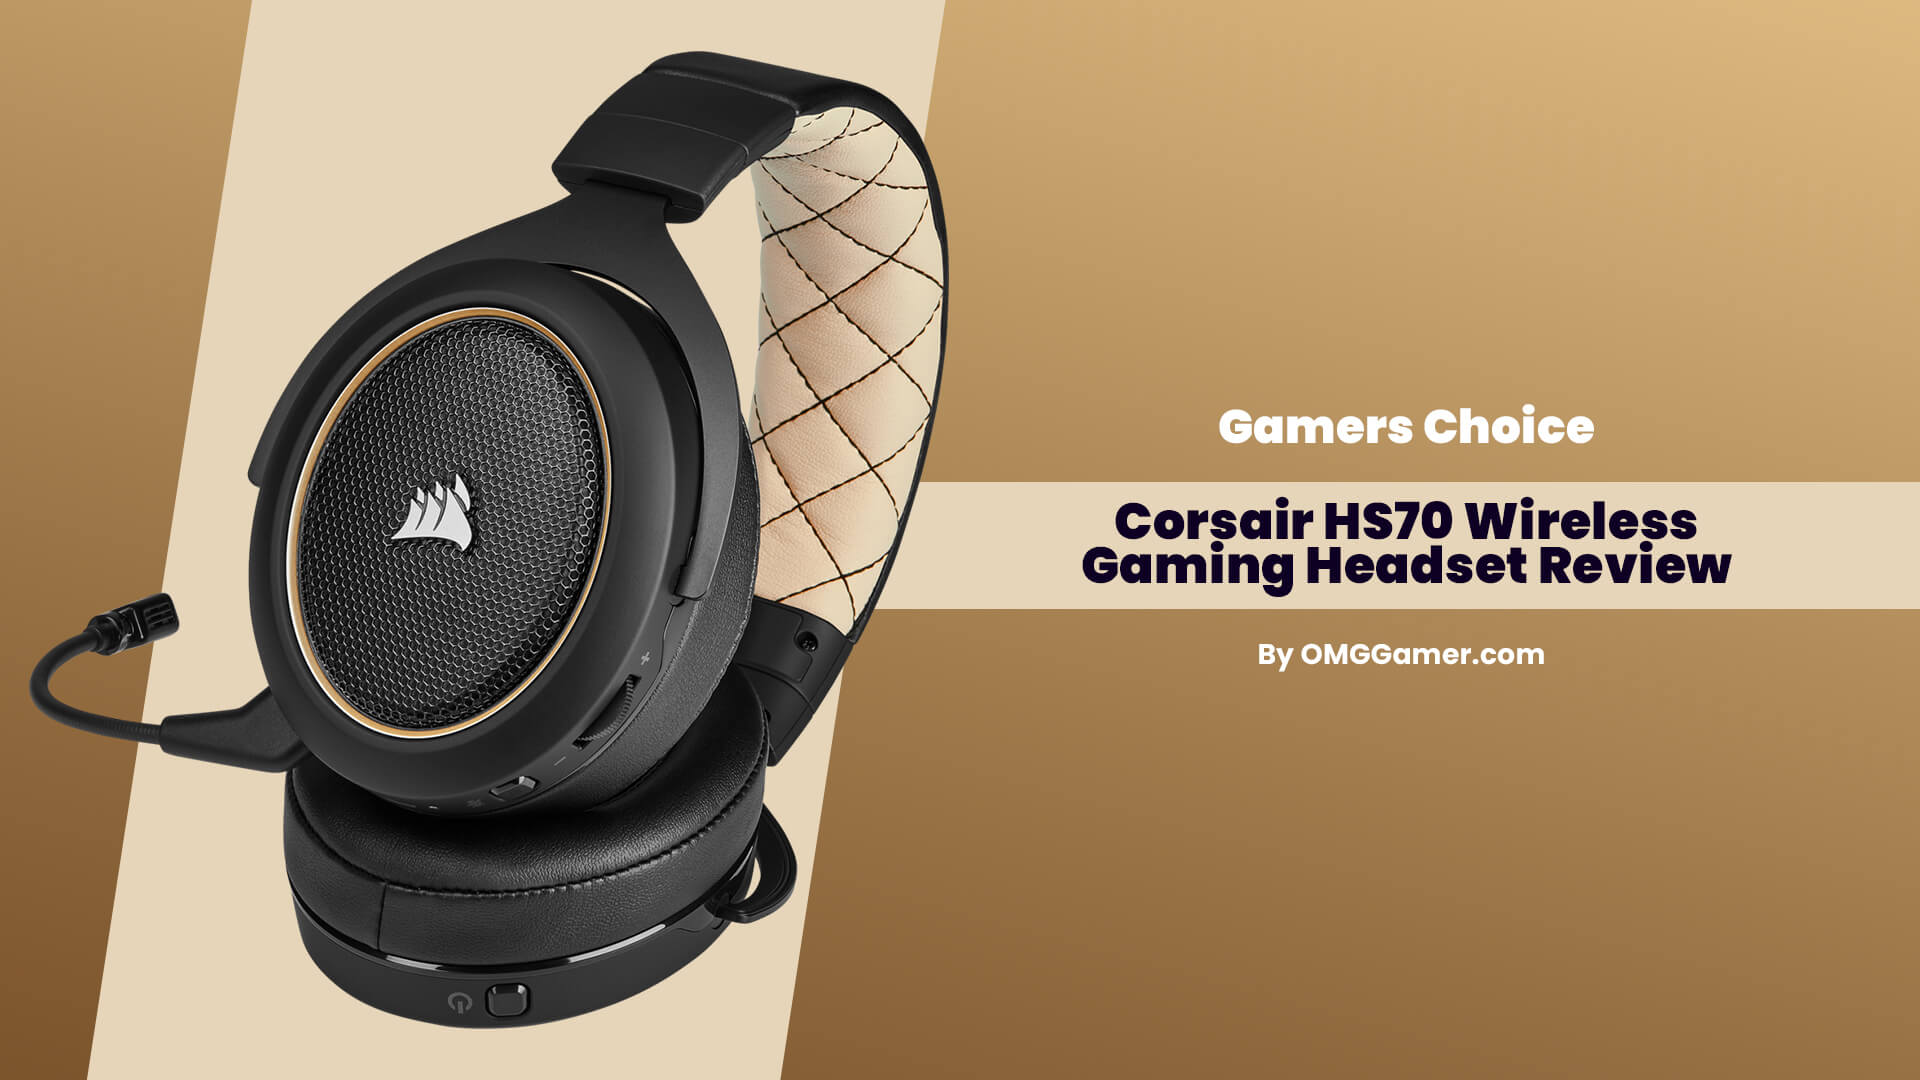 Corsair-HS70-Wireless-Gaming-Headset-Review-